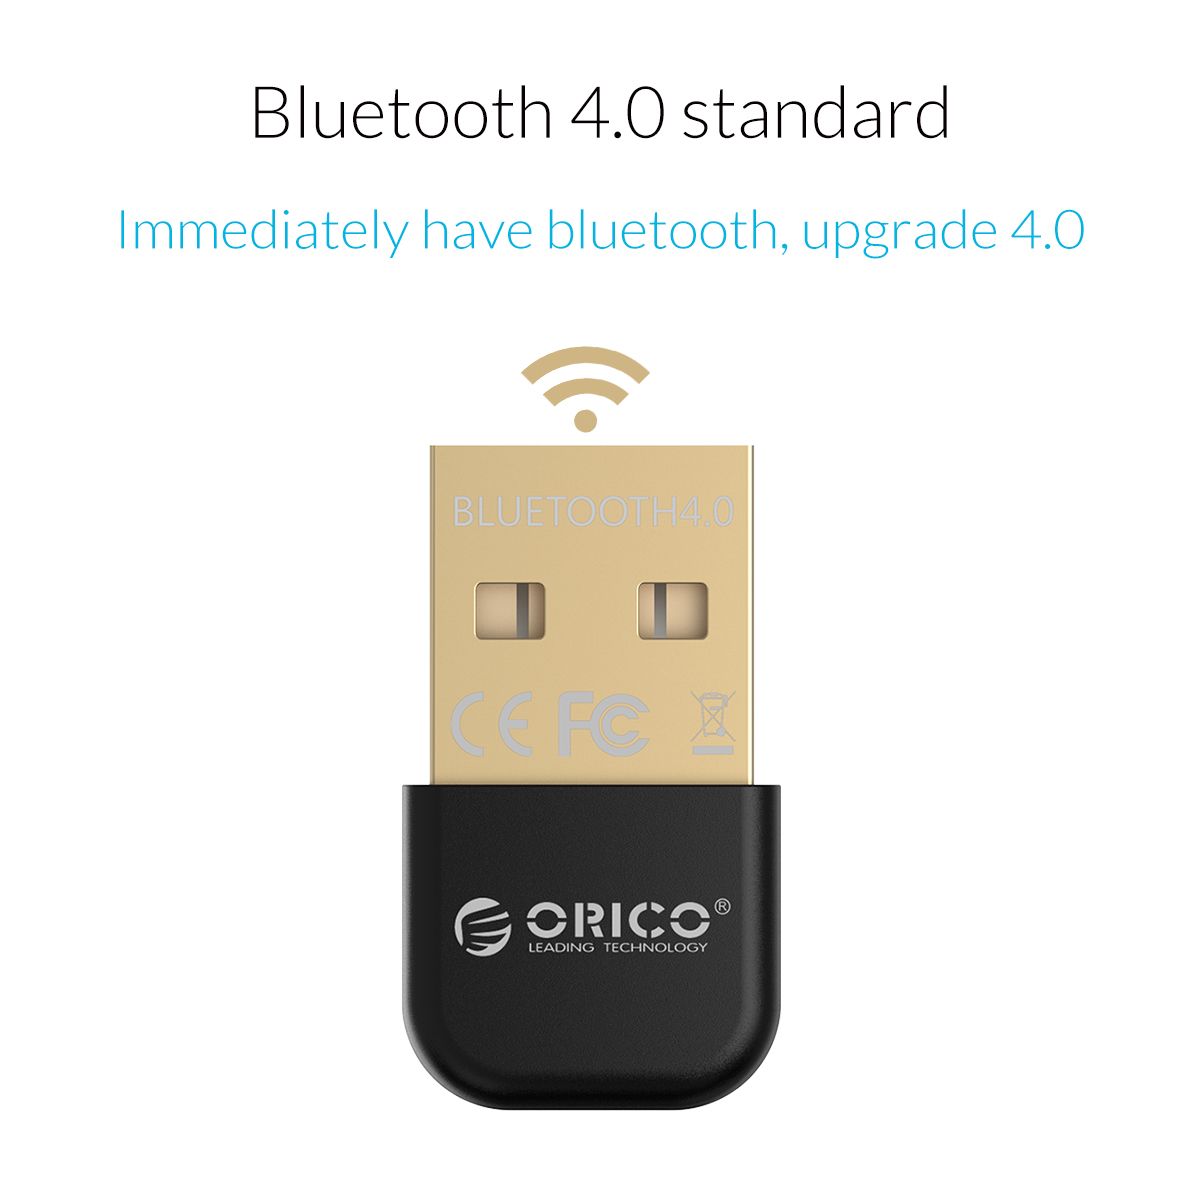 ORICO-Mini-Wireless-USB-bluetooth-40-Receiver-Transmitter-Adapter-For-Windows-XP-Vista-7810-Connect--1643149